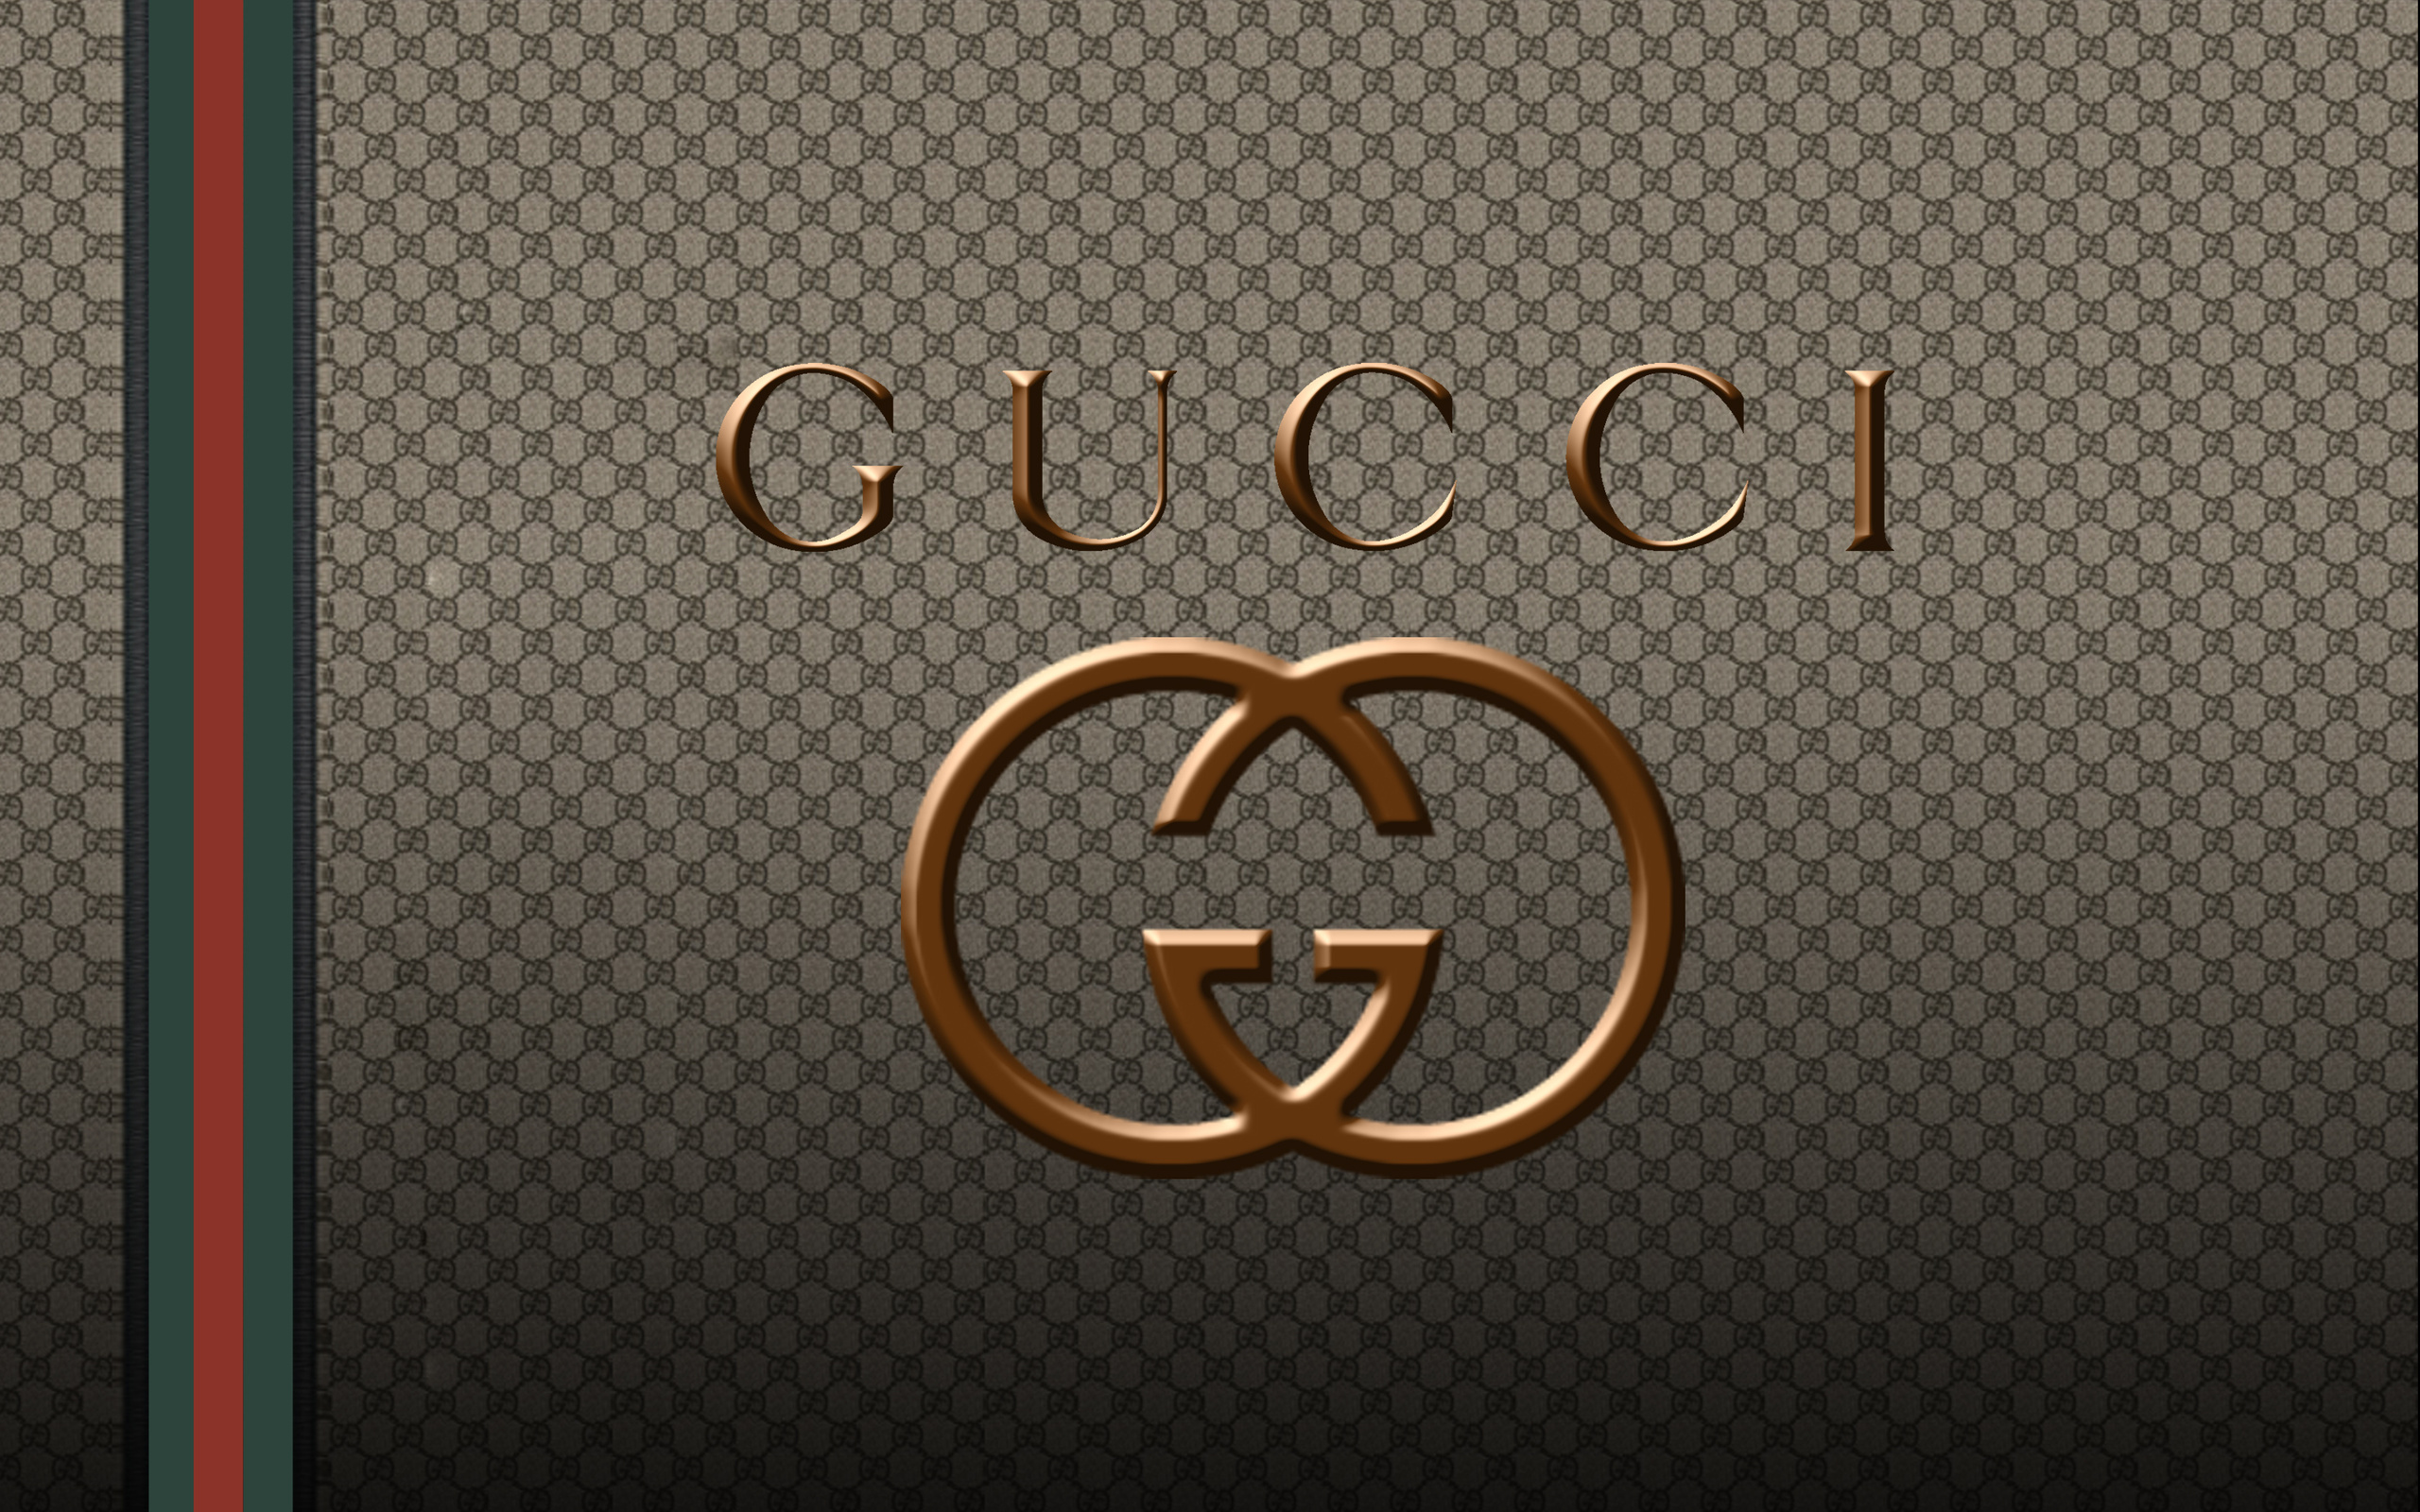 Gucci-logo-wallpapers-HD-pictures-images